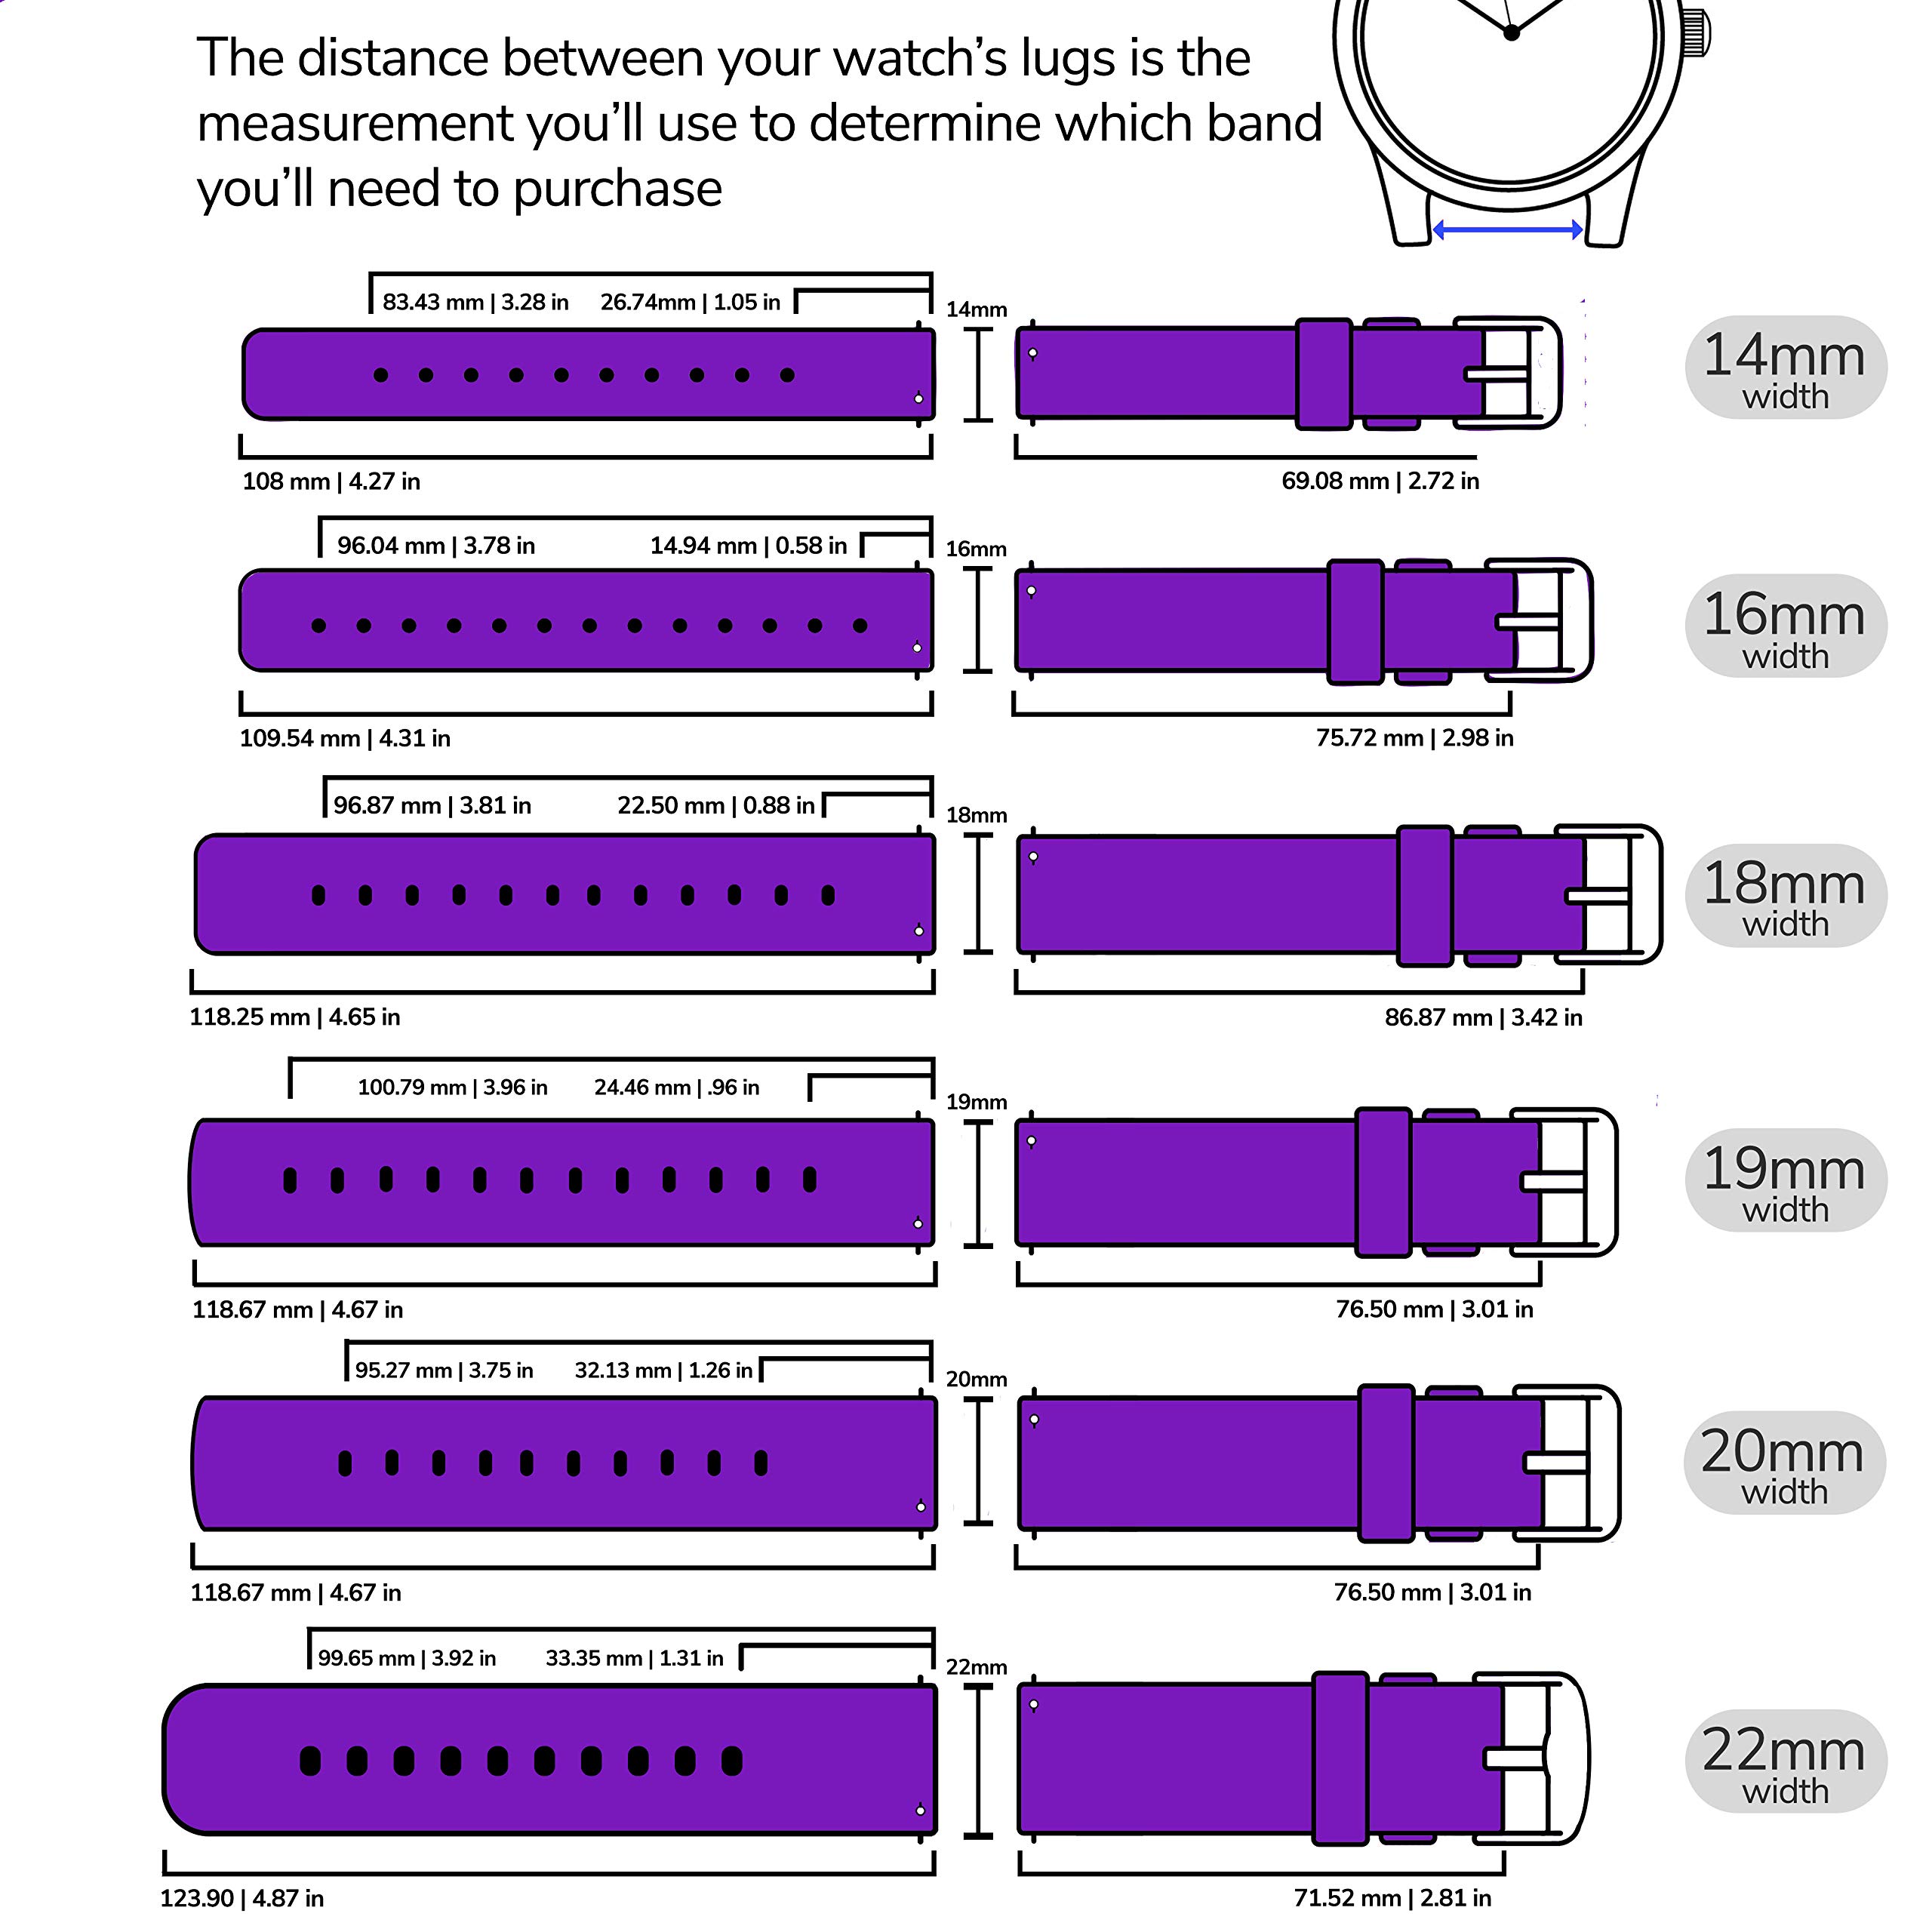 GadgetWraps 20mm Gizmo Watch Silicone Watch Band Strap with Quick Release Pins – Compatible with Gizmo Watch, Samsung, Pebble – 20mm Quick Release Watch Band (Medium Purple, 20mm)